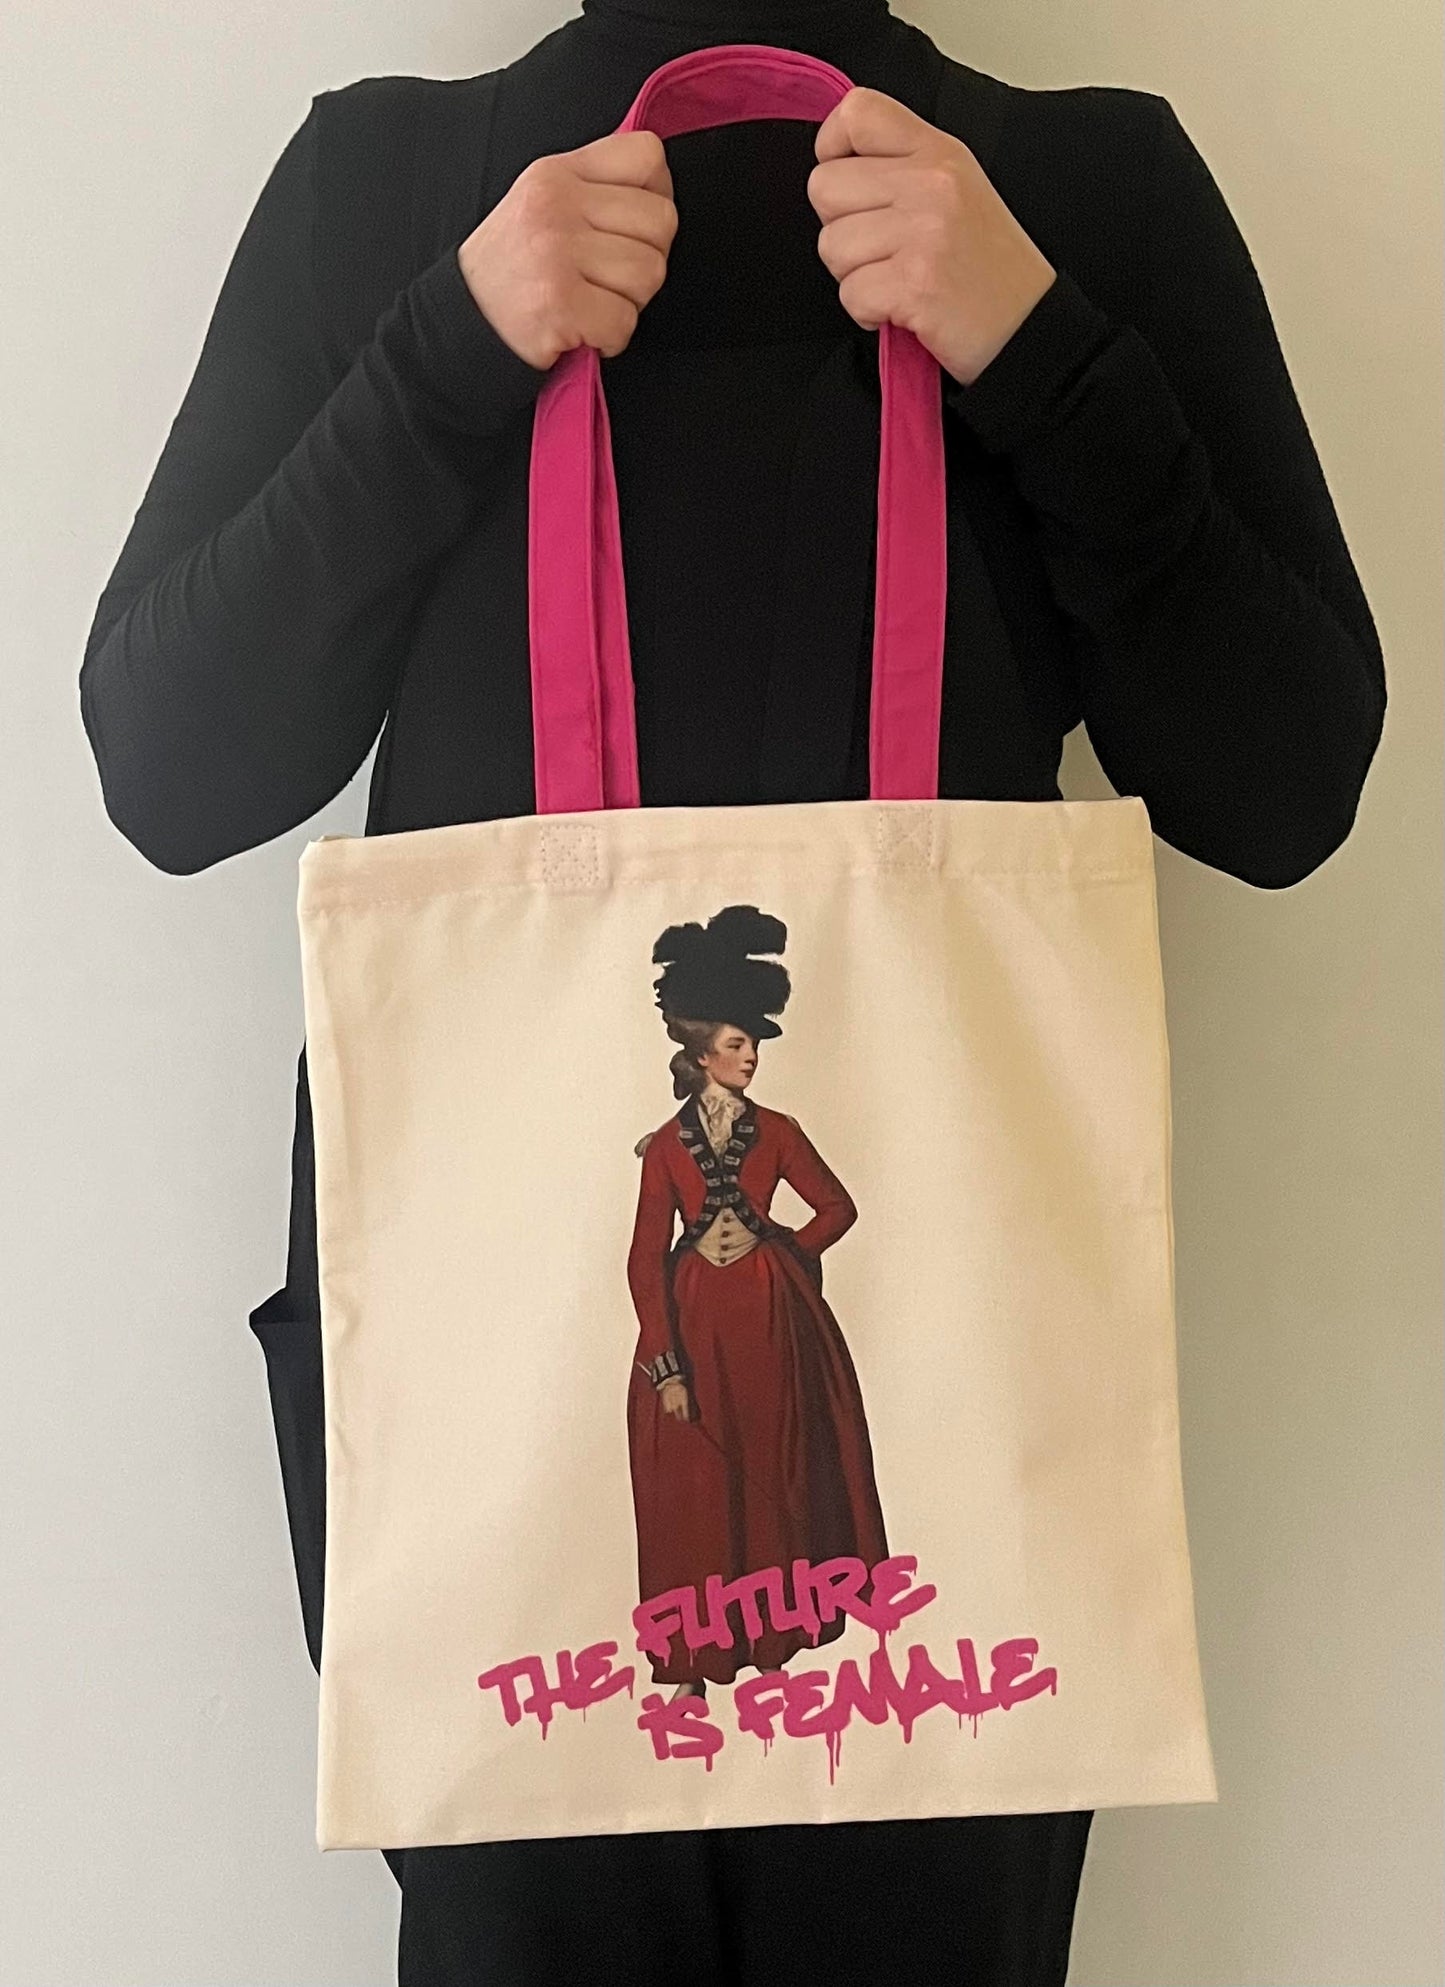 Lady Worsley 'The Future is Female' Tote Bag